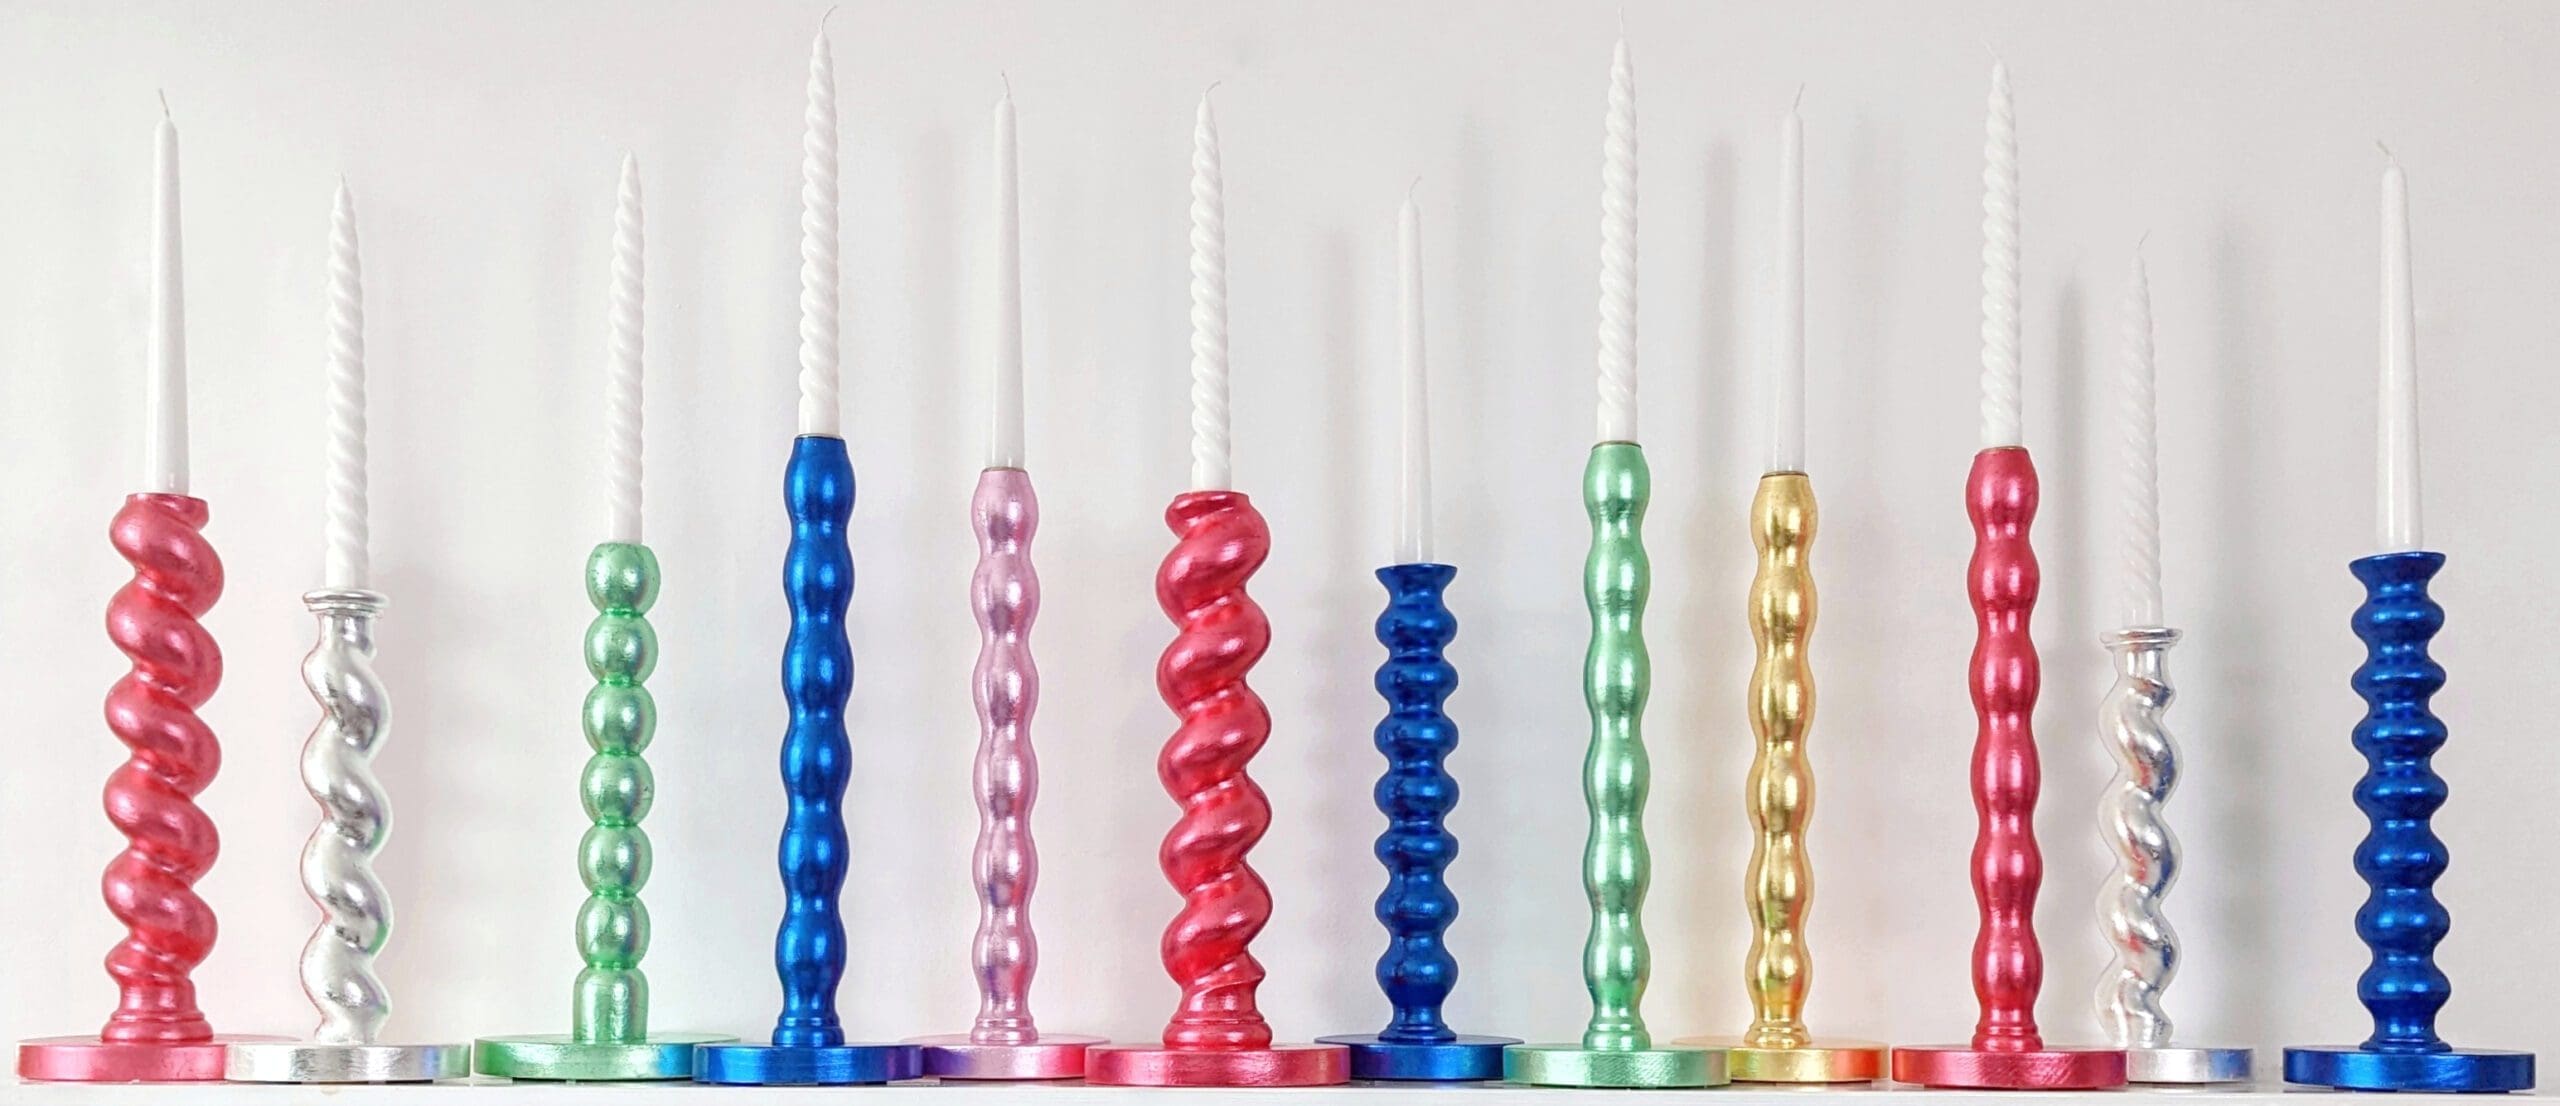 The new Webb & Gray gilded Candlestick Collection.  12 candlesticks in Scarlet, Genuine Silver, Mint Green, Royal Blue, Candy Pink and Golden finishes.